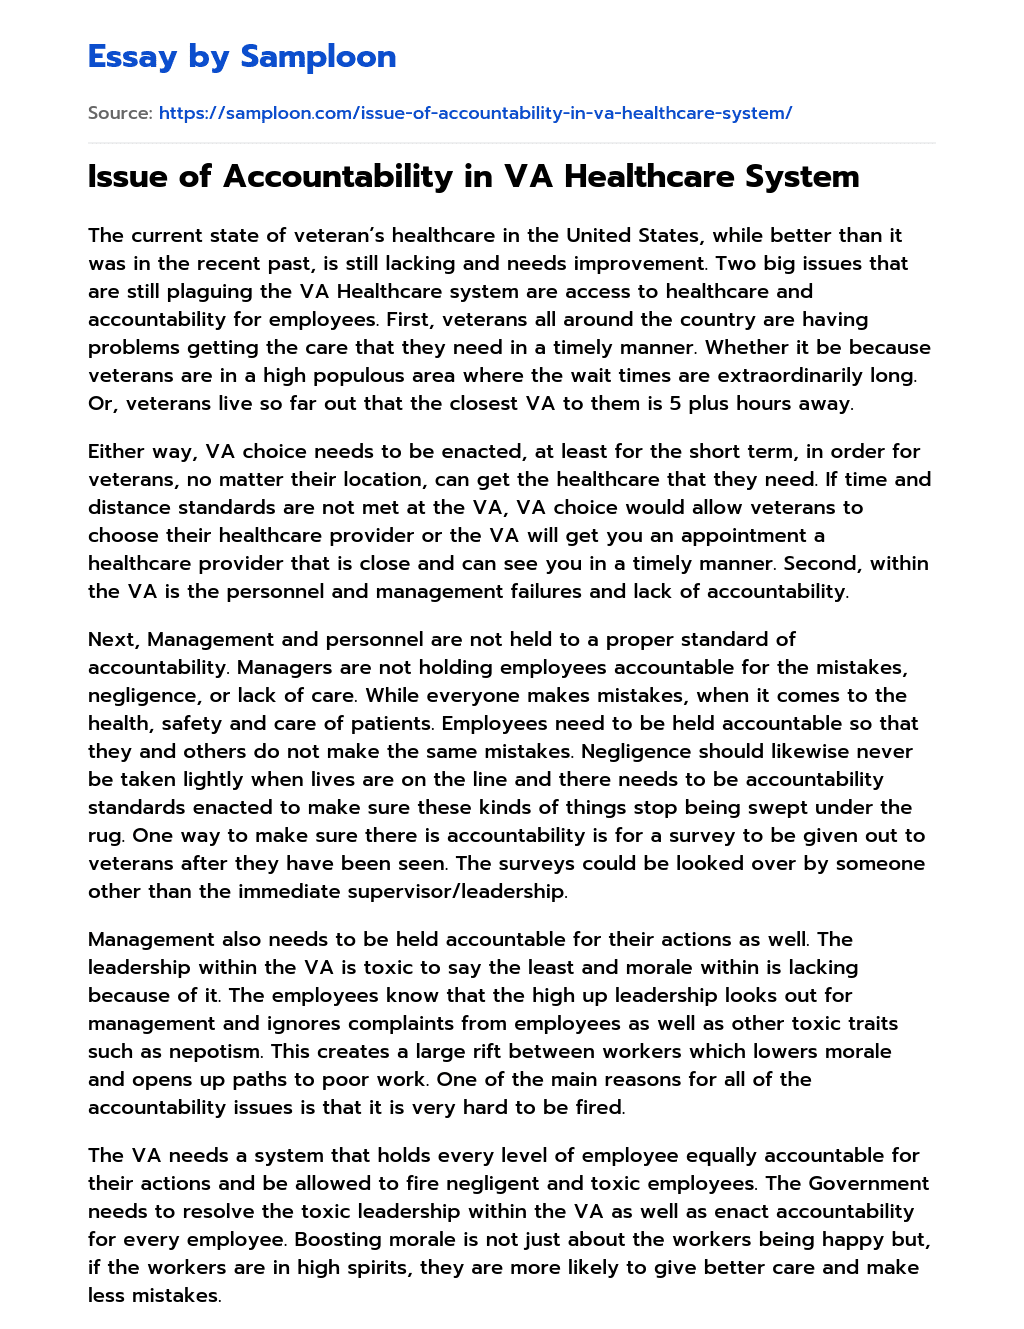 Issue of Accountability in VA Healthcare System essay